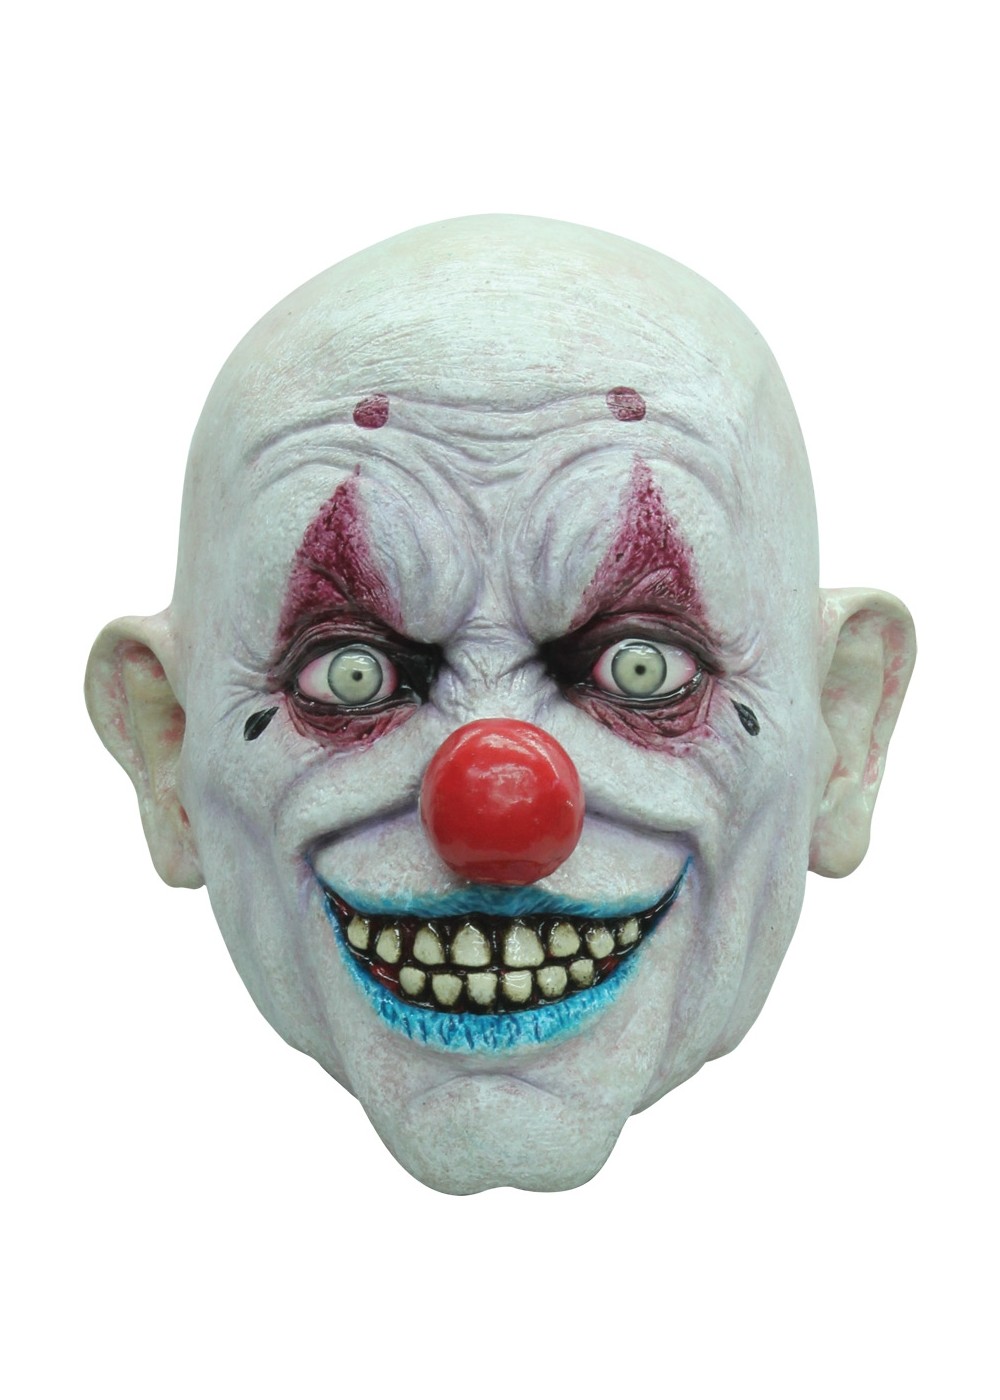 Scary Clown Mask